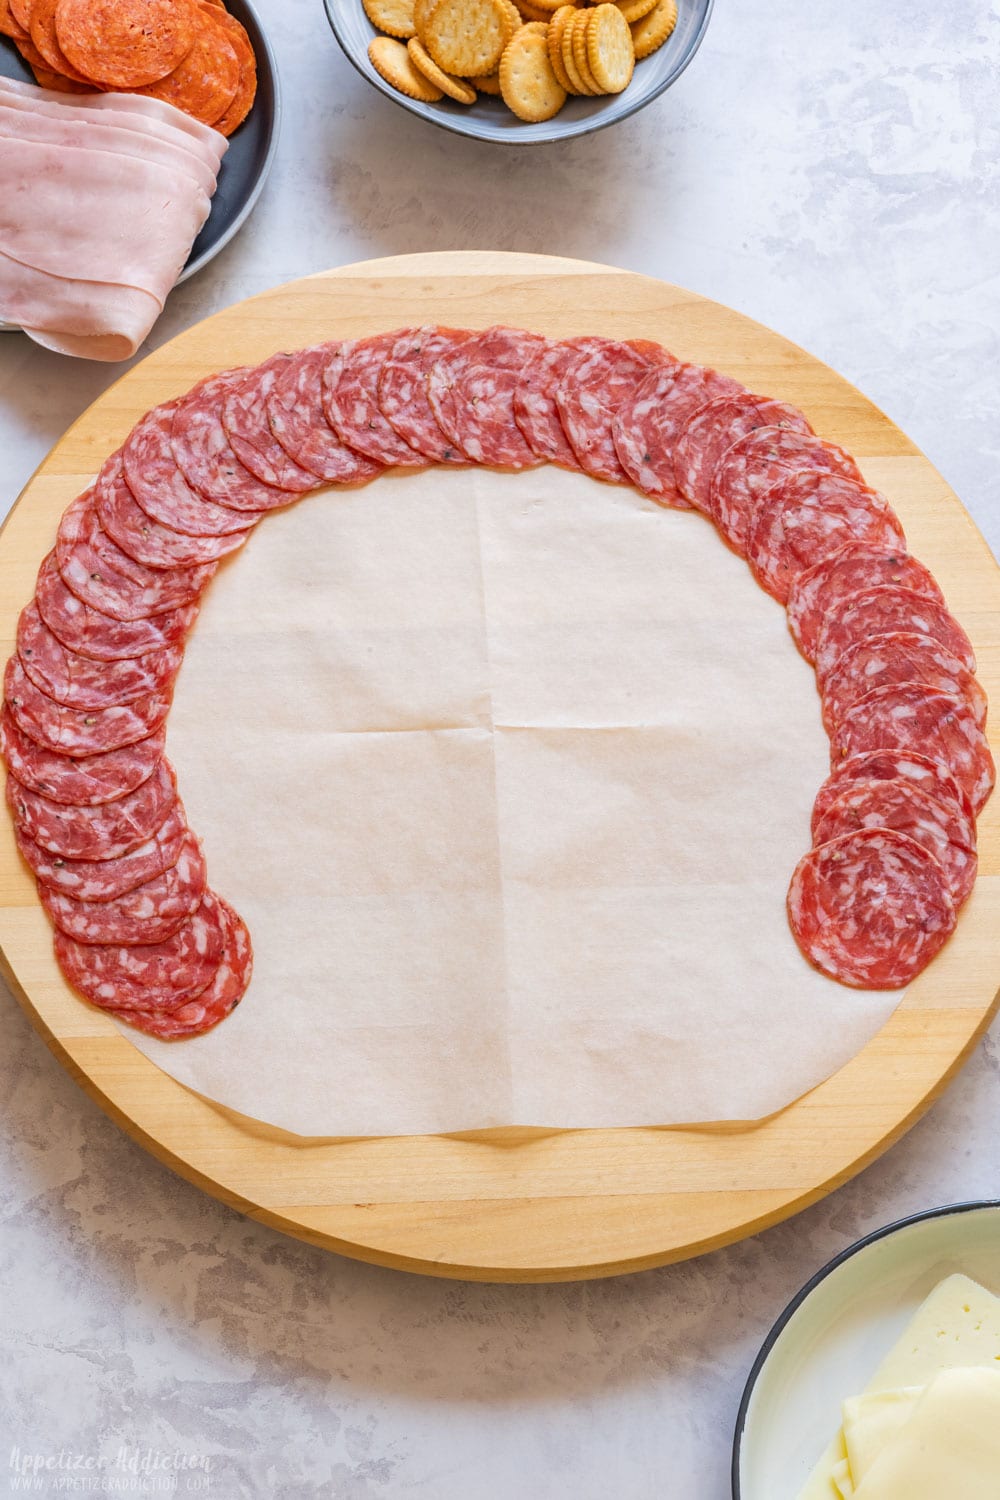 Salami slices arranged on the platter in a half circle.